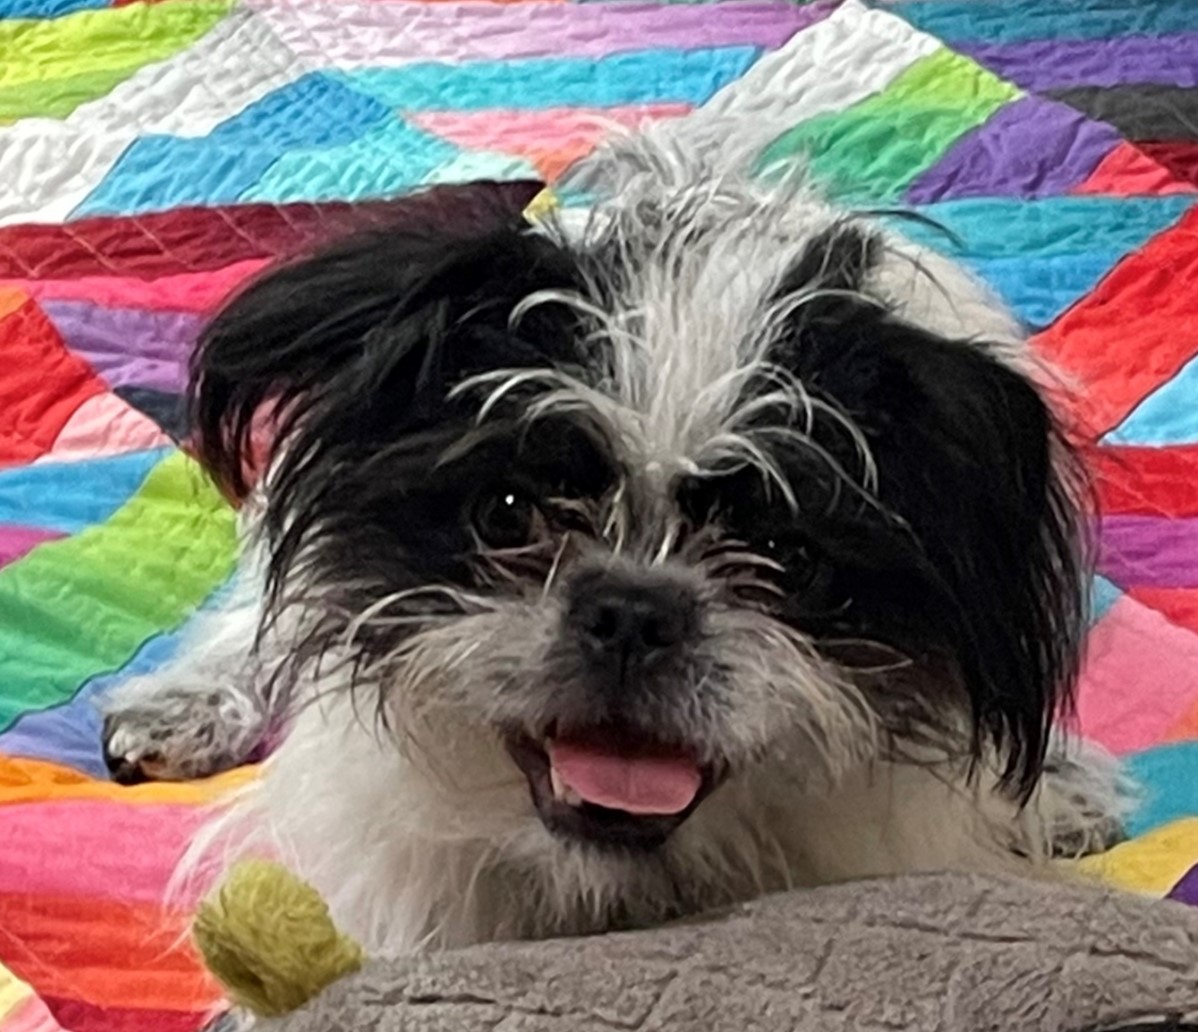 Black and white dog on a colorful quilt